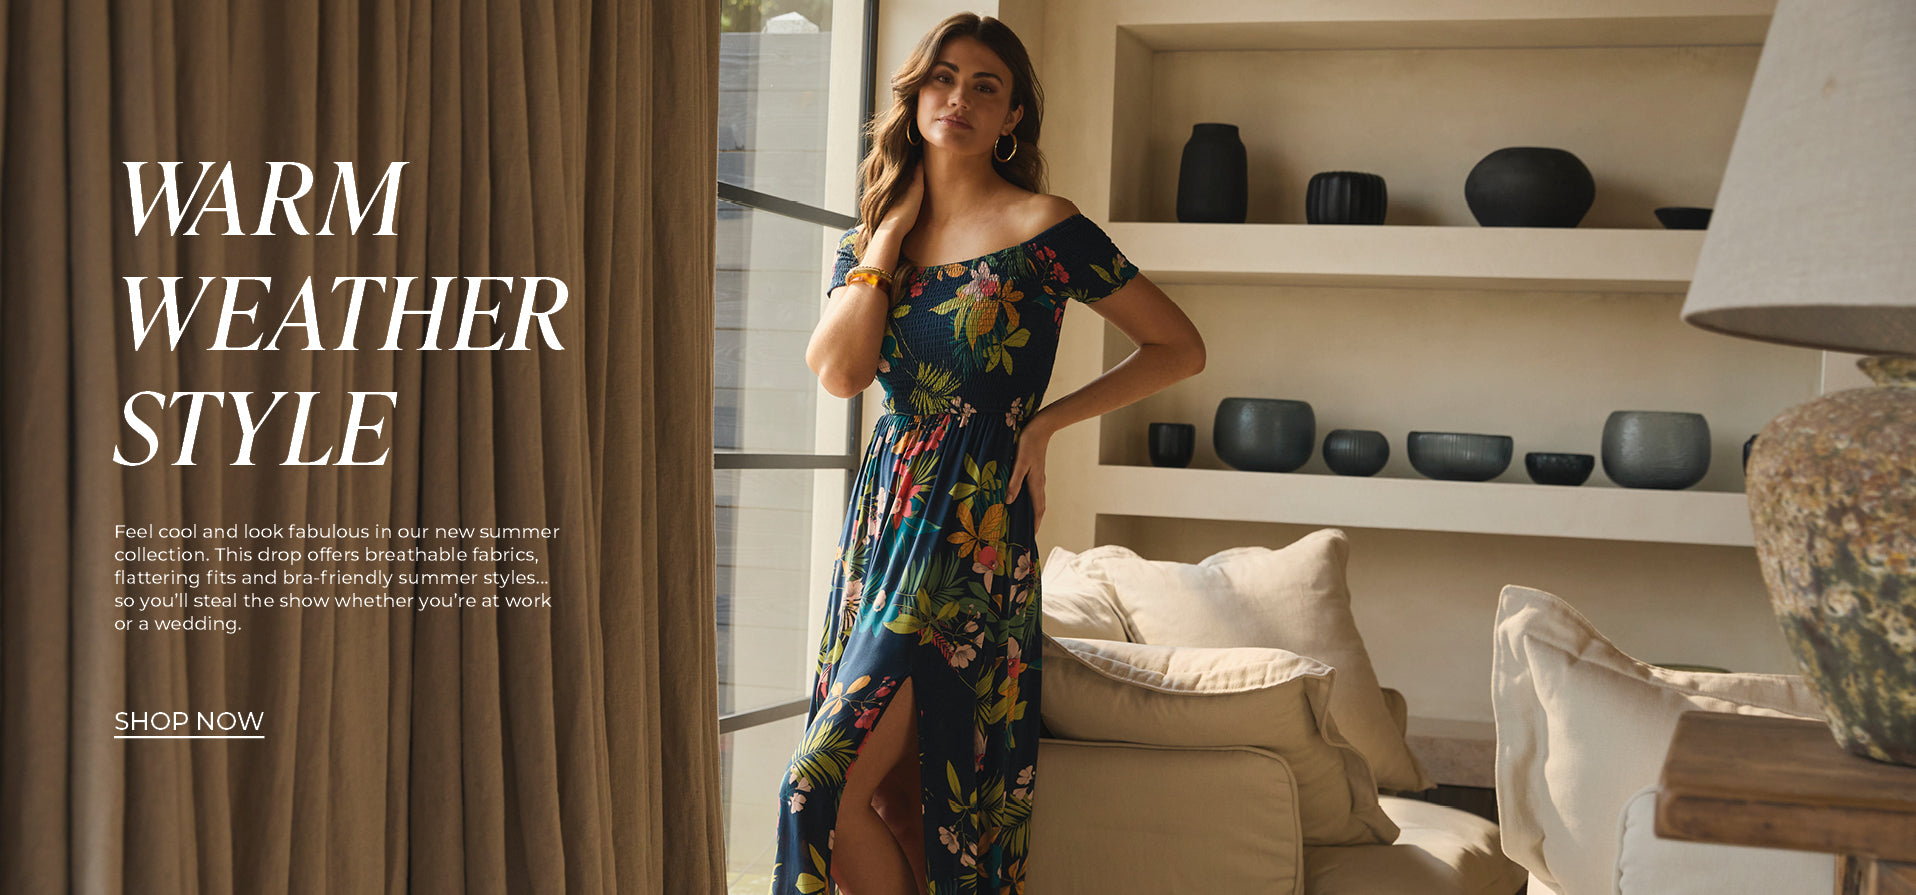 Feel cool and look fabulous in our new summer collection. This drop offers breathable fabrics, flattering fits and bra-friendly summer styles… so you’ll steal the show whether you’re at work or a wedding.